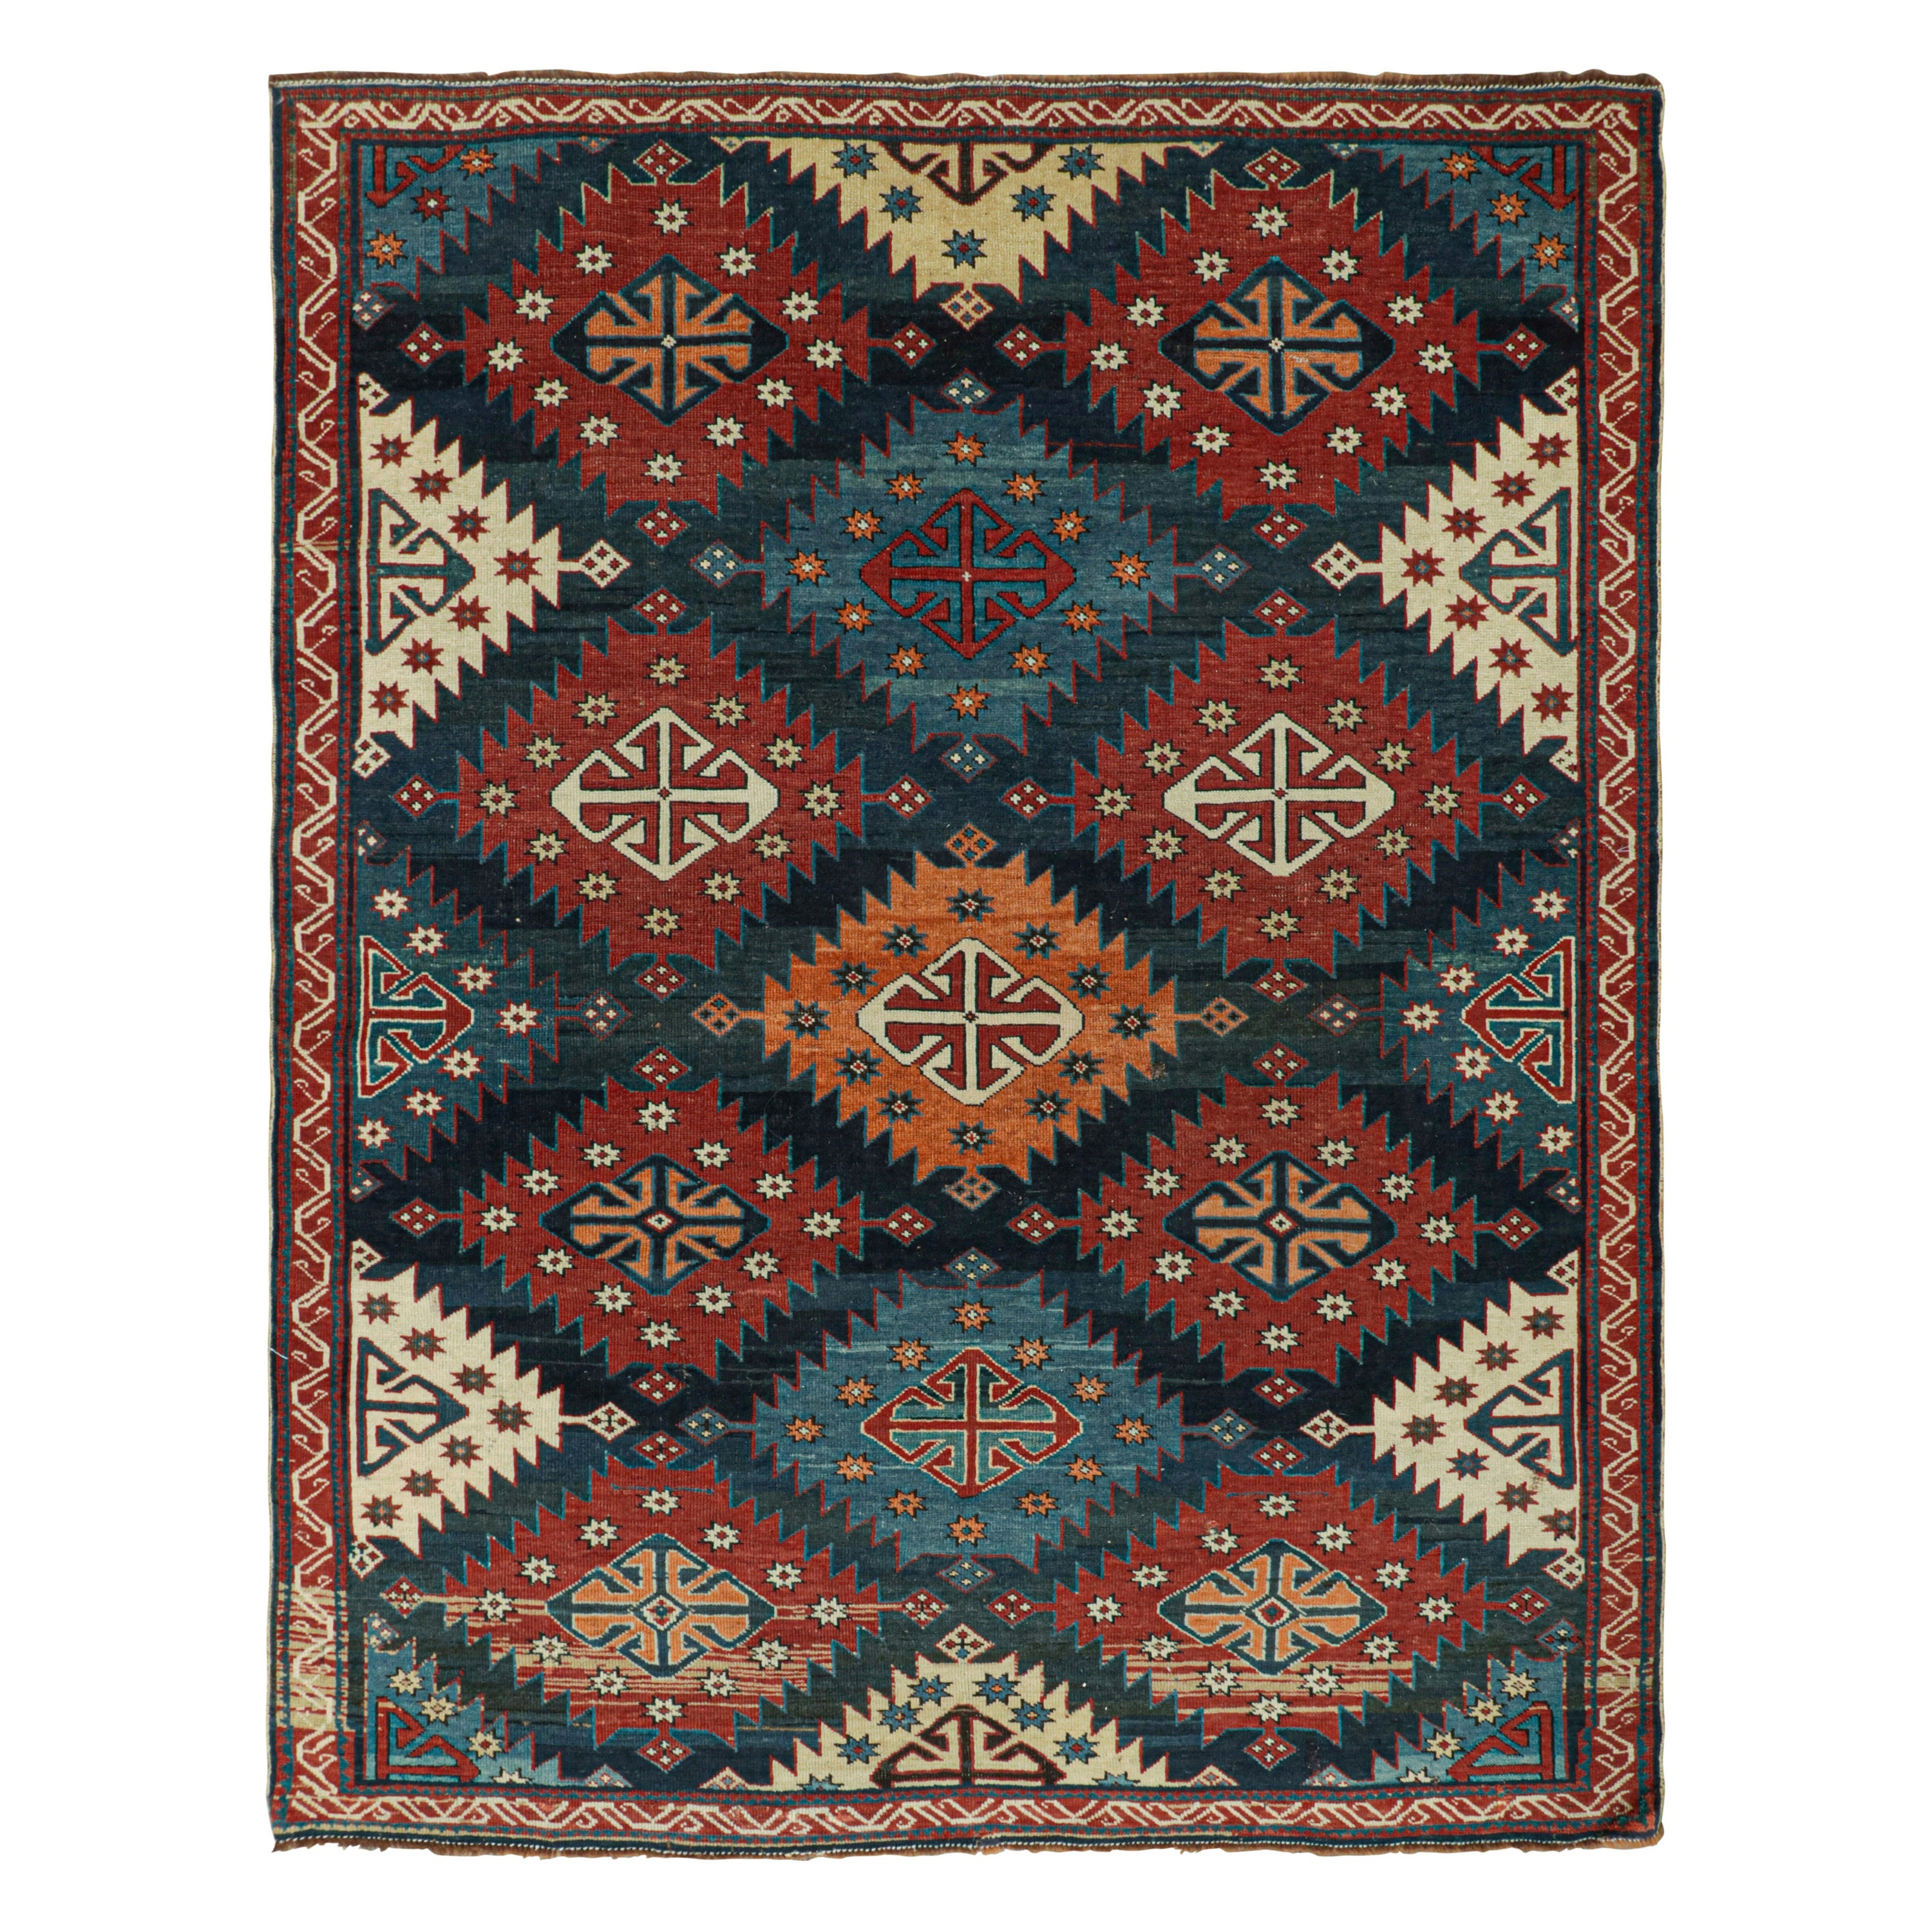 Antique Caucasian Kazak Rug in Red & Blue Tribal Patterns from Rug & Kilim For Sale